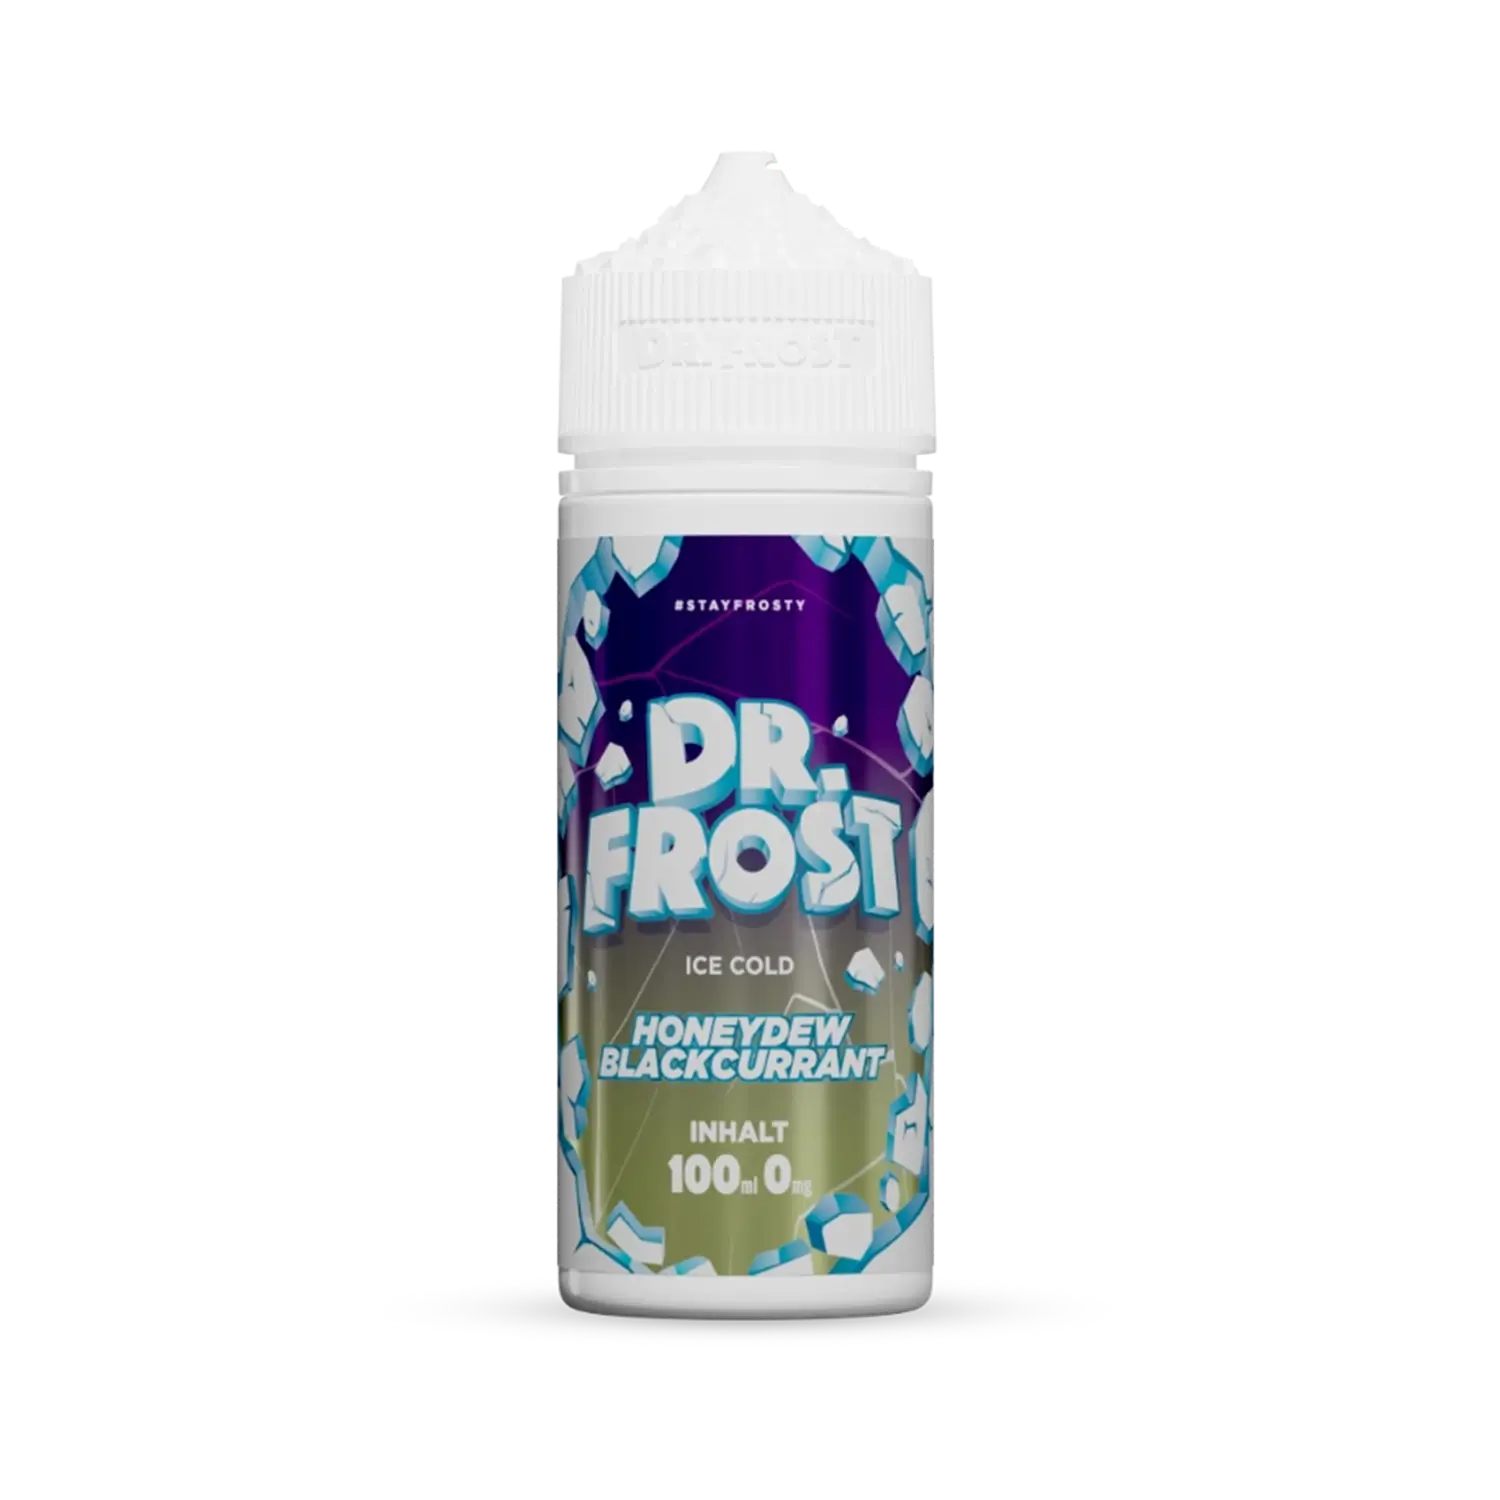 Dr. Frost - Ice Cold - Honeydew Blackcurrant 100 ml Liquid